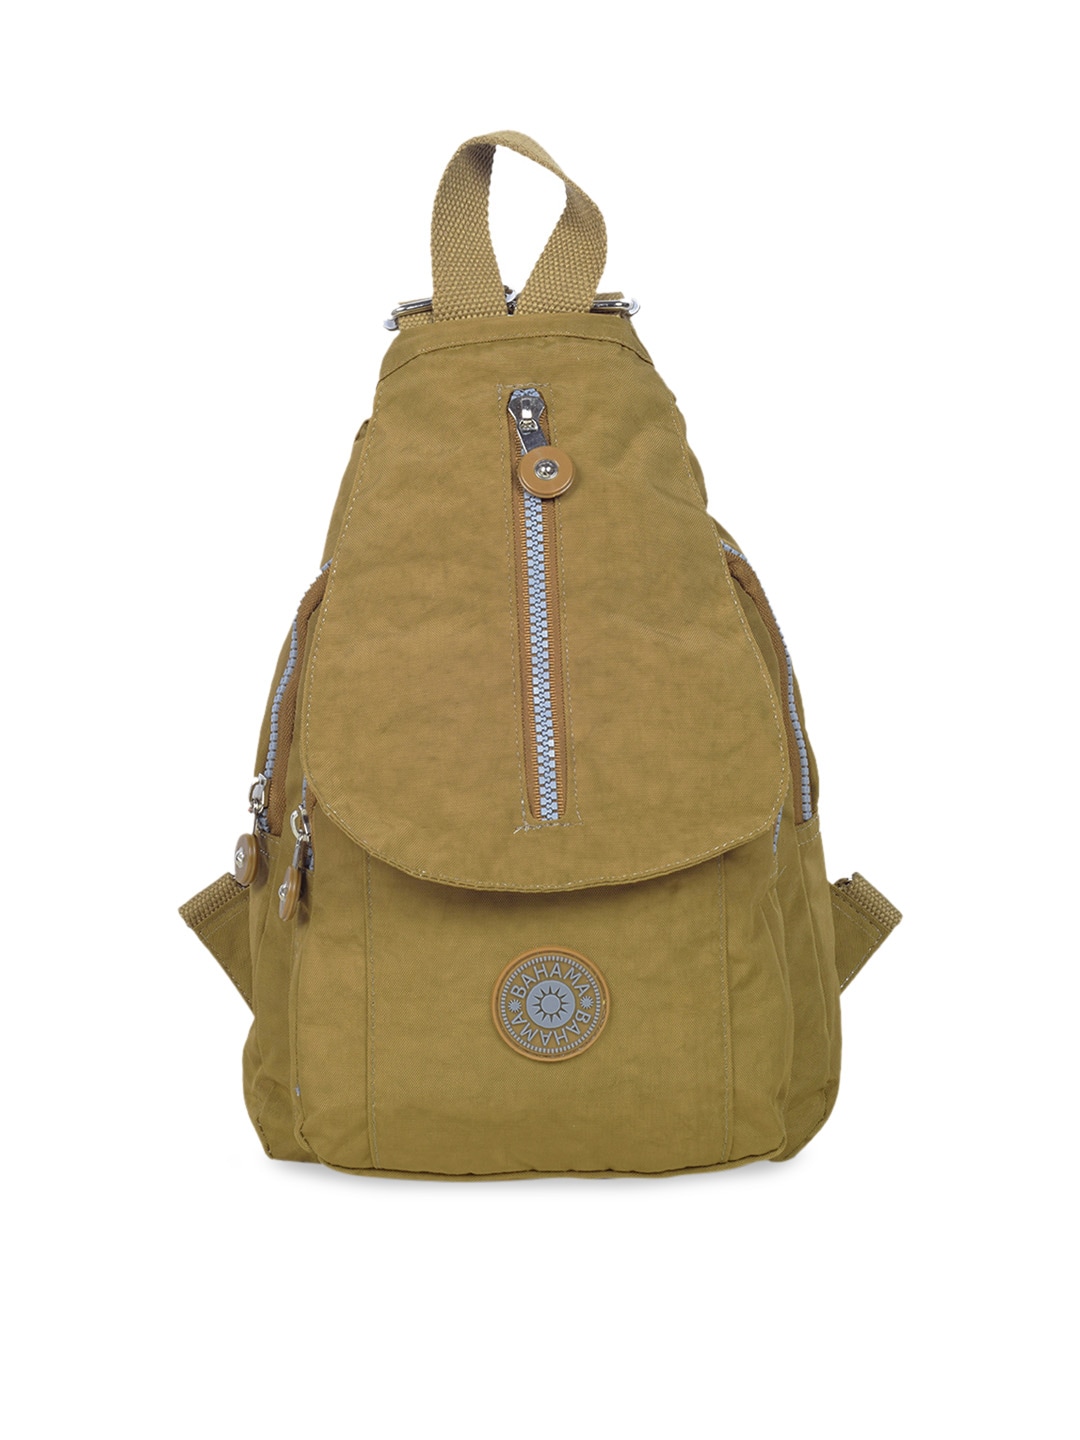 BAHAMA Crinkle Unisex Brown Solid Backpack Price in India